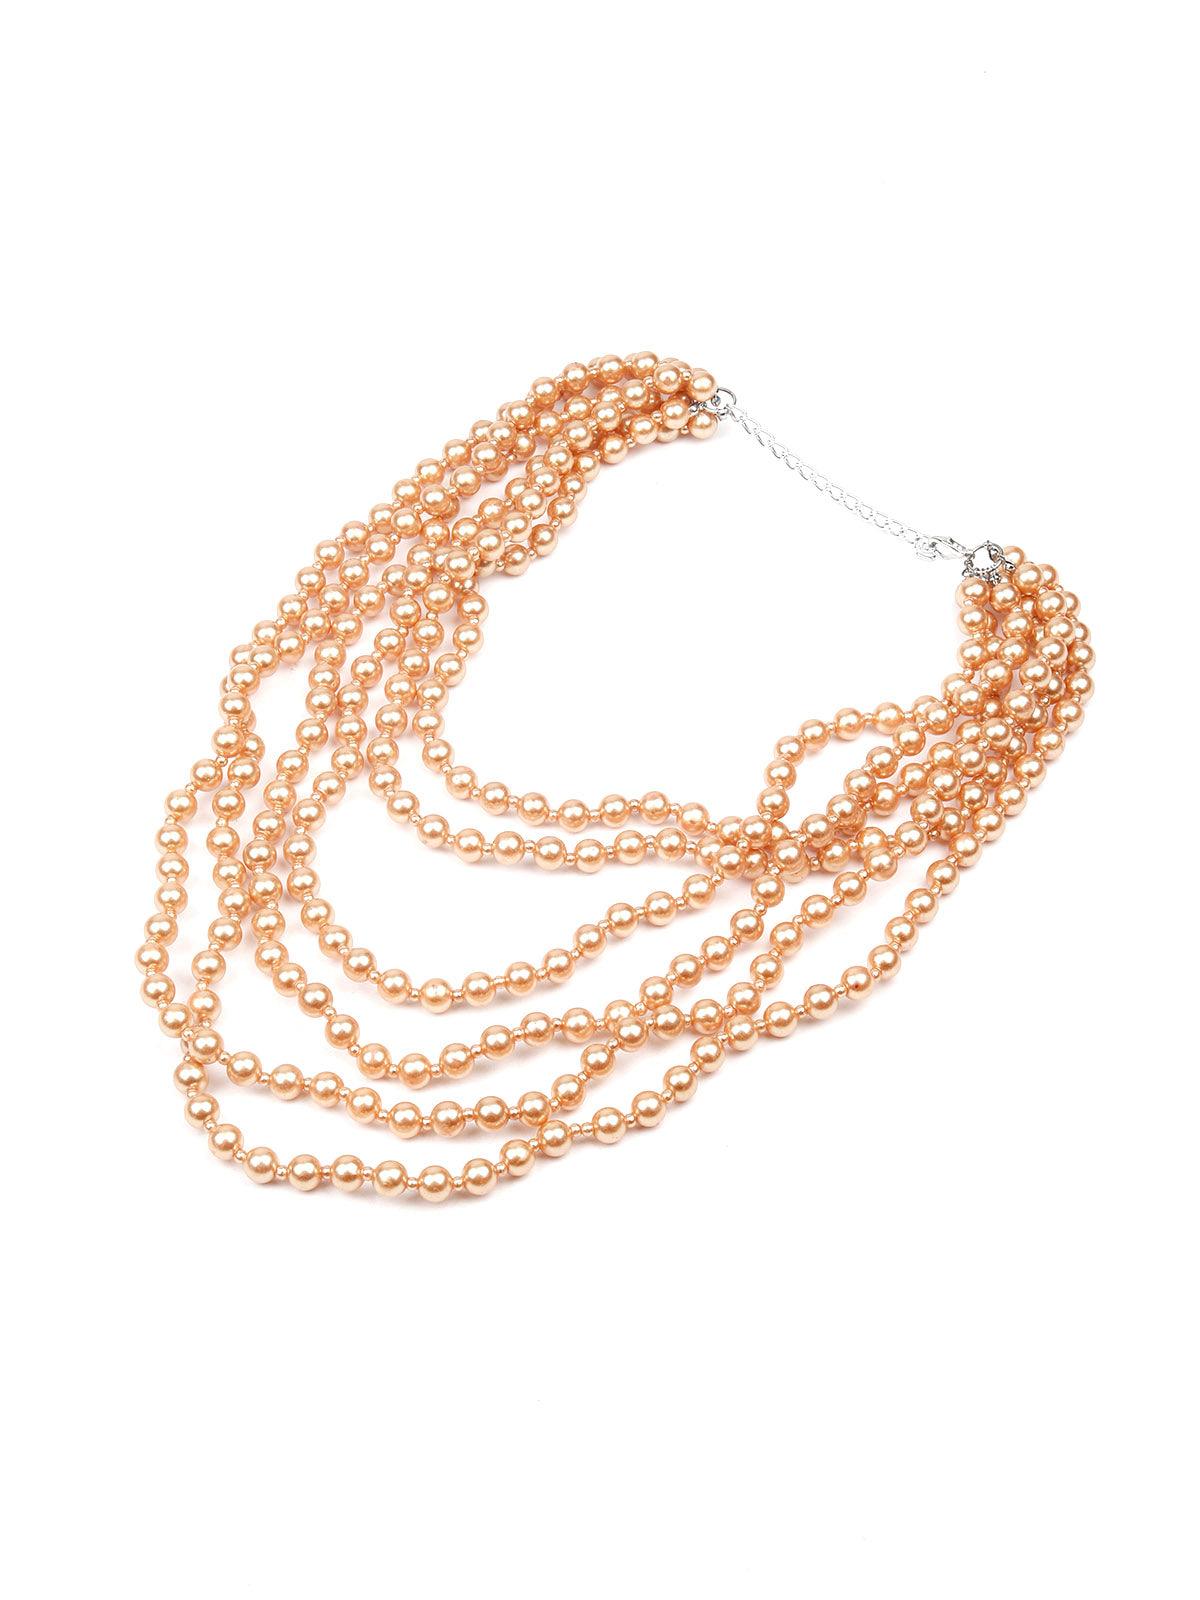 

Multilayered gold tone beaded necklace for women